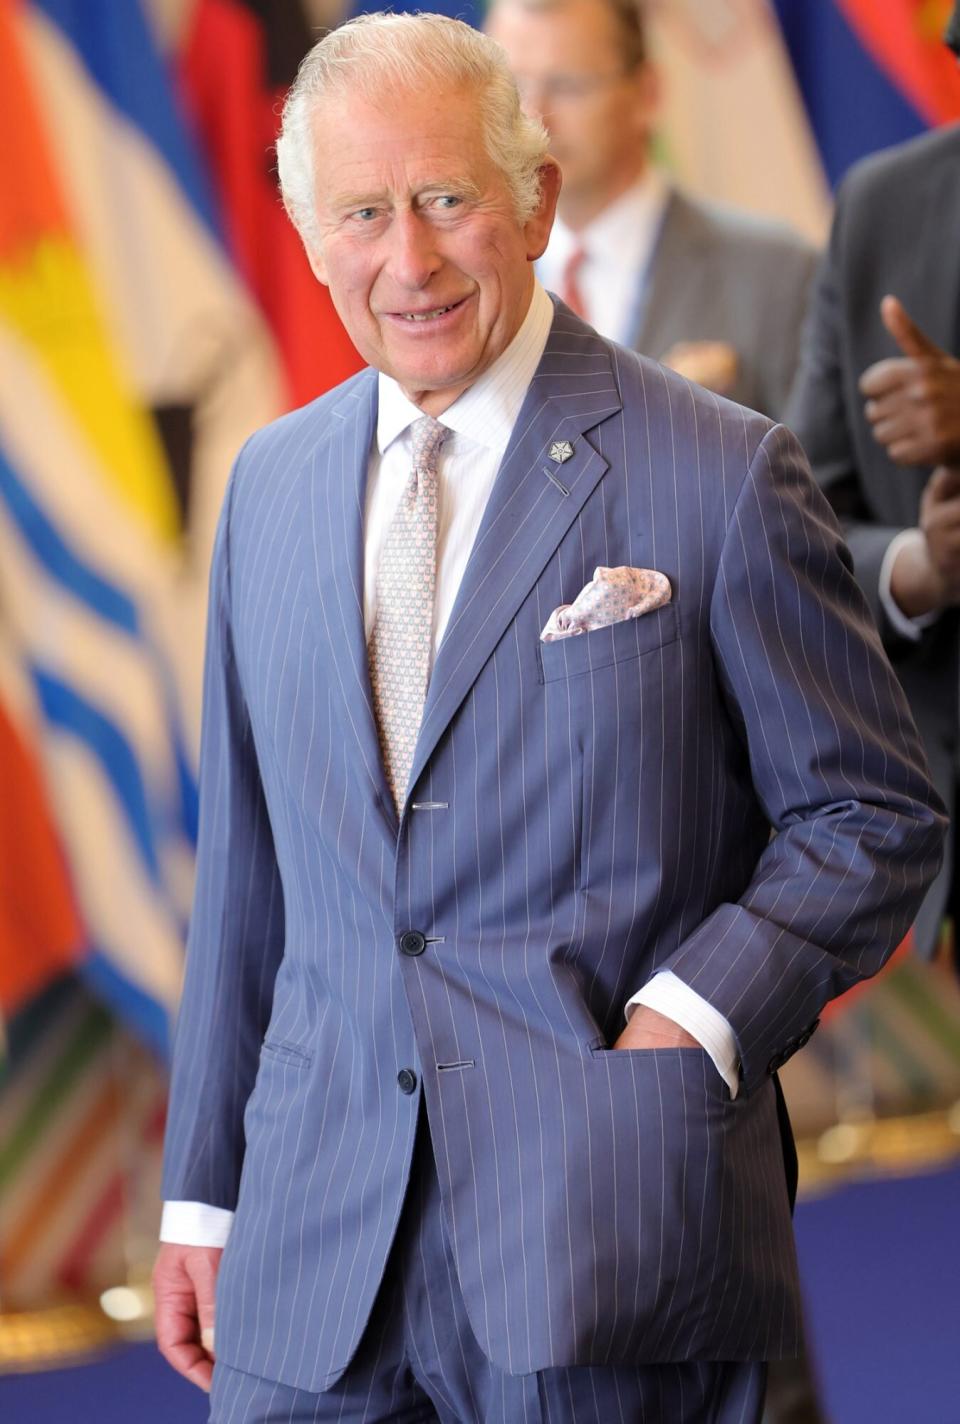 Prince Charles, Prince of Wales smiles as he departs the CHOGM opening ceremony at Kigali Convention Centre